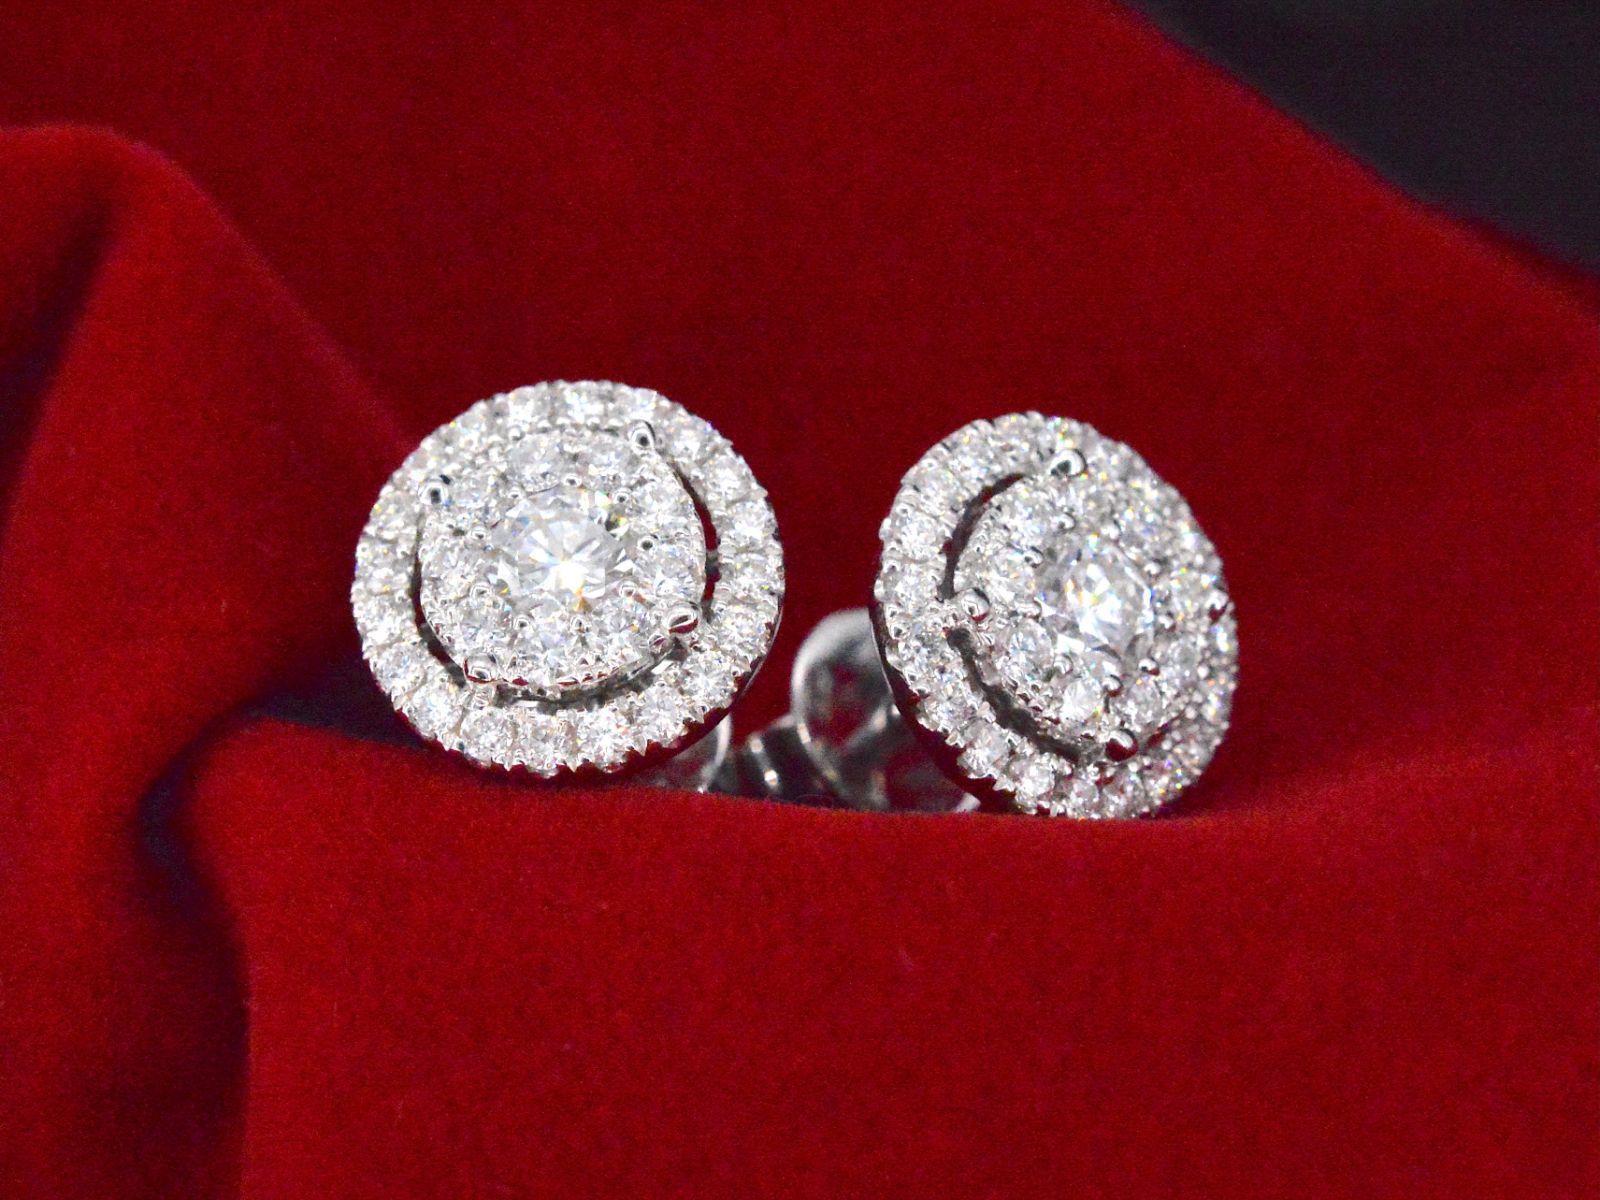 Introducing an exquisite pair of earrings that radiate elegance and sophistication. These earrings feature naturally shiny brilliant-cut diamonds, weighing a total of 1.60 carats. With a color grading of F-G and a purity level of VS, these diamonds